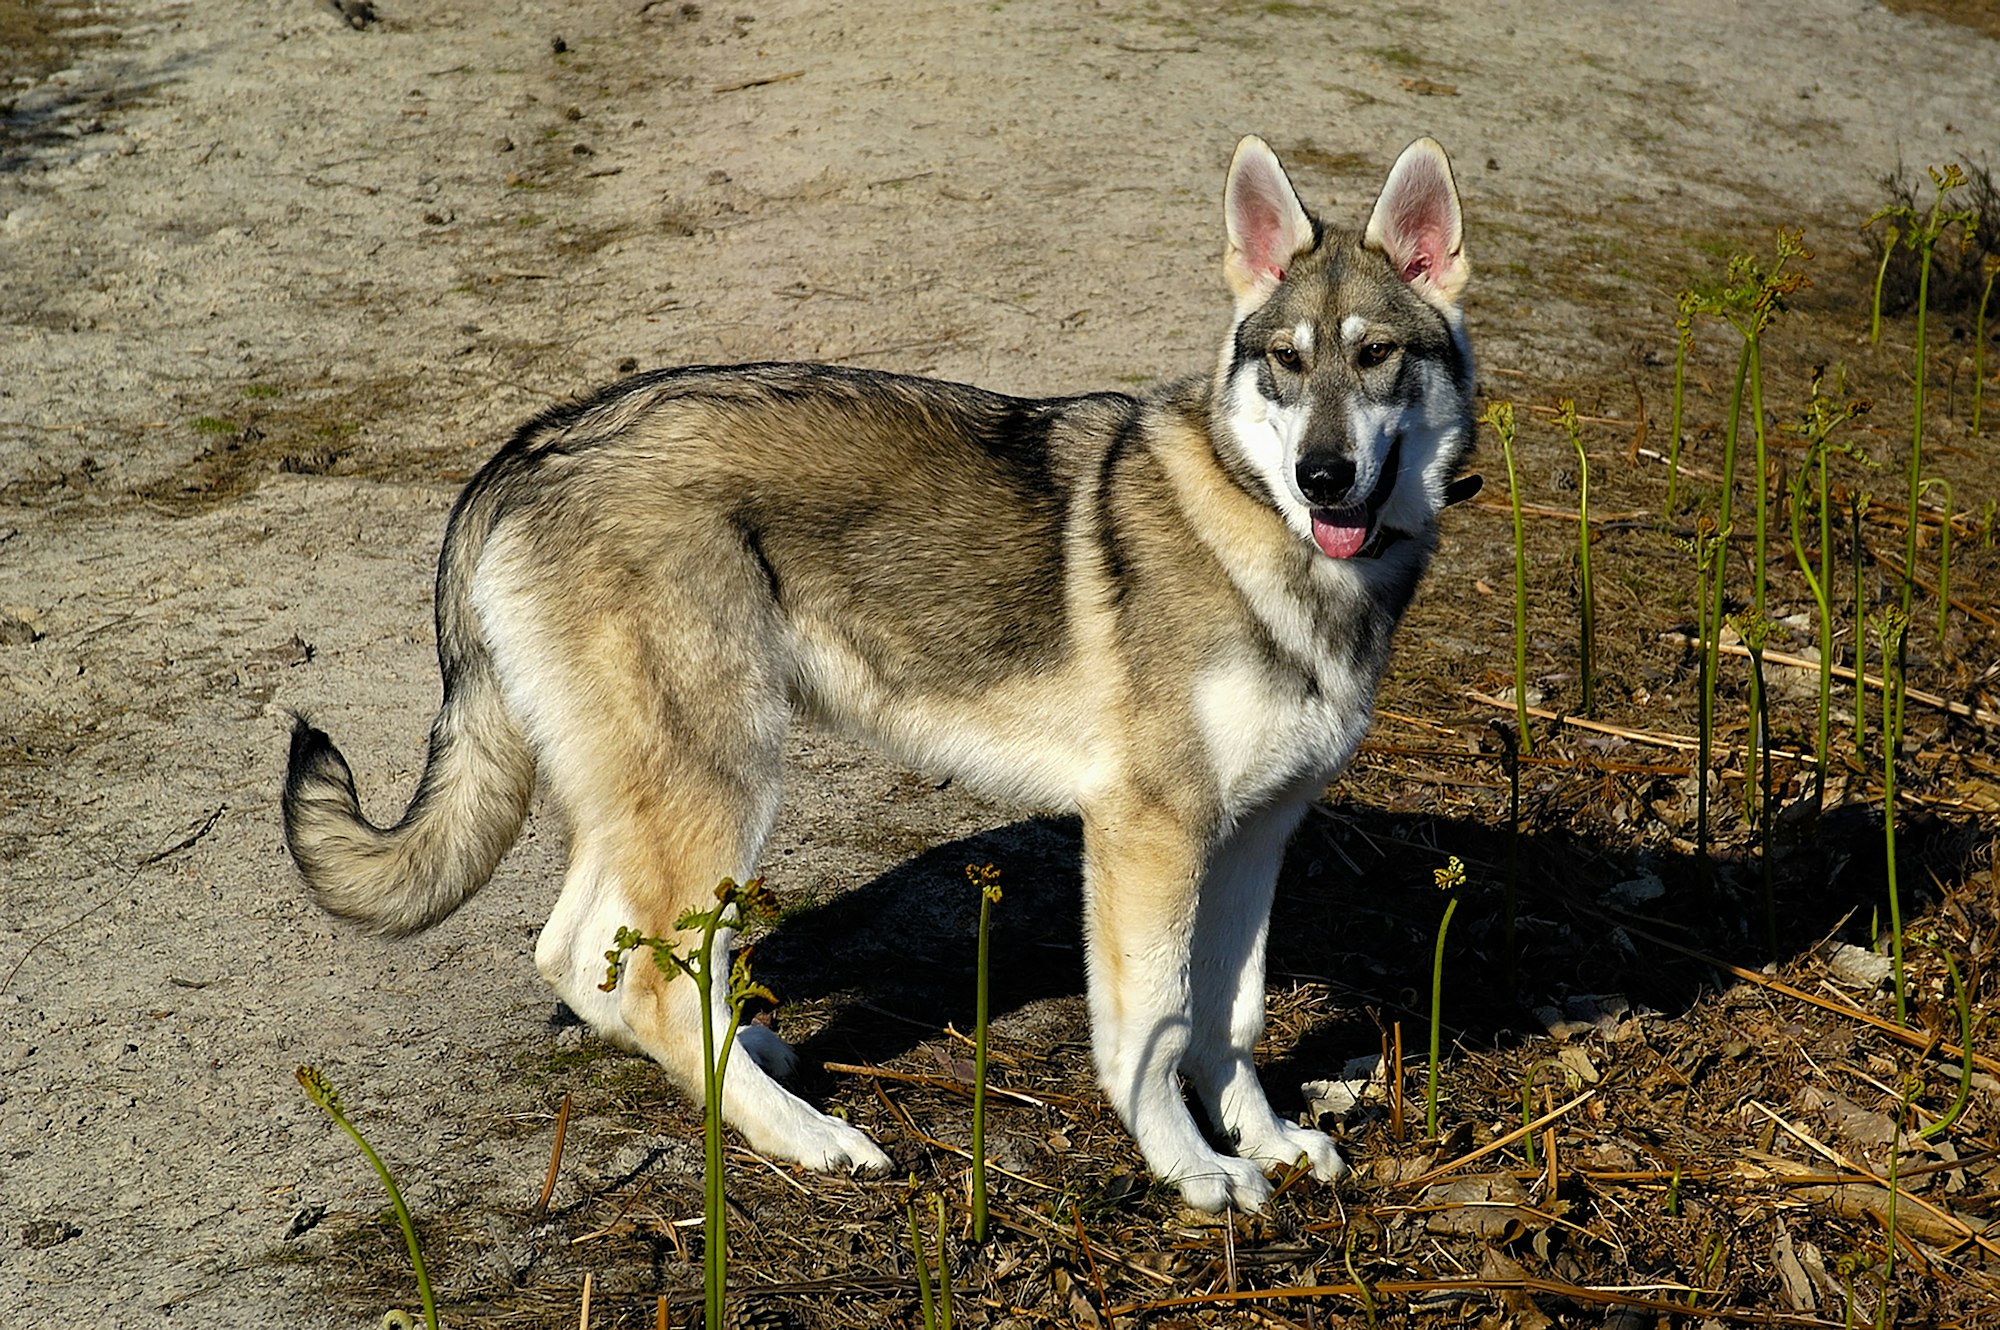 a Northern Inuit Dog standing on a dirt road next to grass